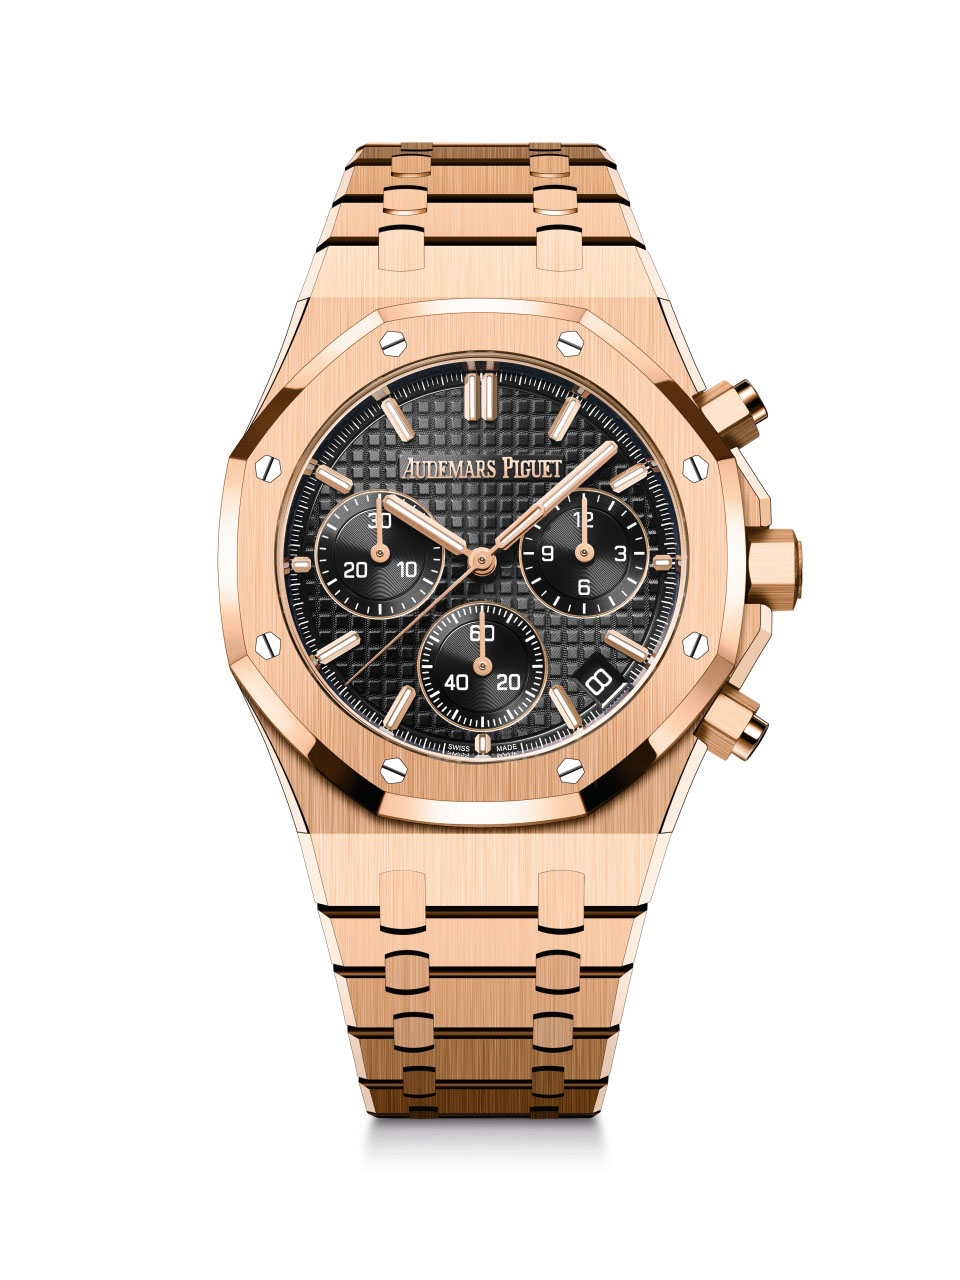 Royal Oak Selfwinding Chronograph / 41mm; 18-carat pink gold case with black dial (26240OR.OO.1320OR.02)